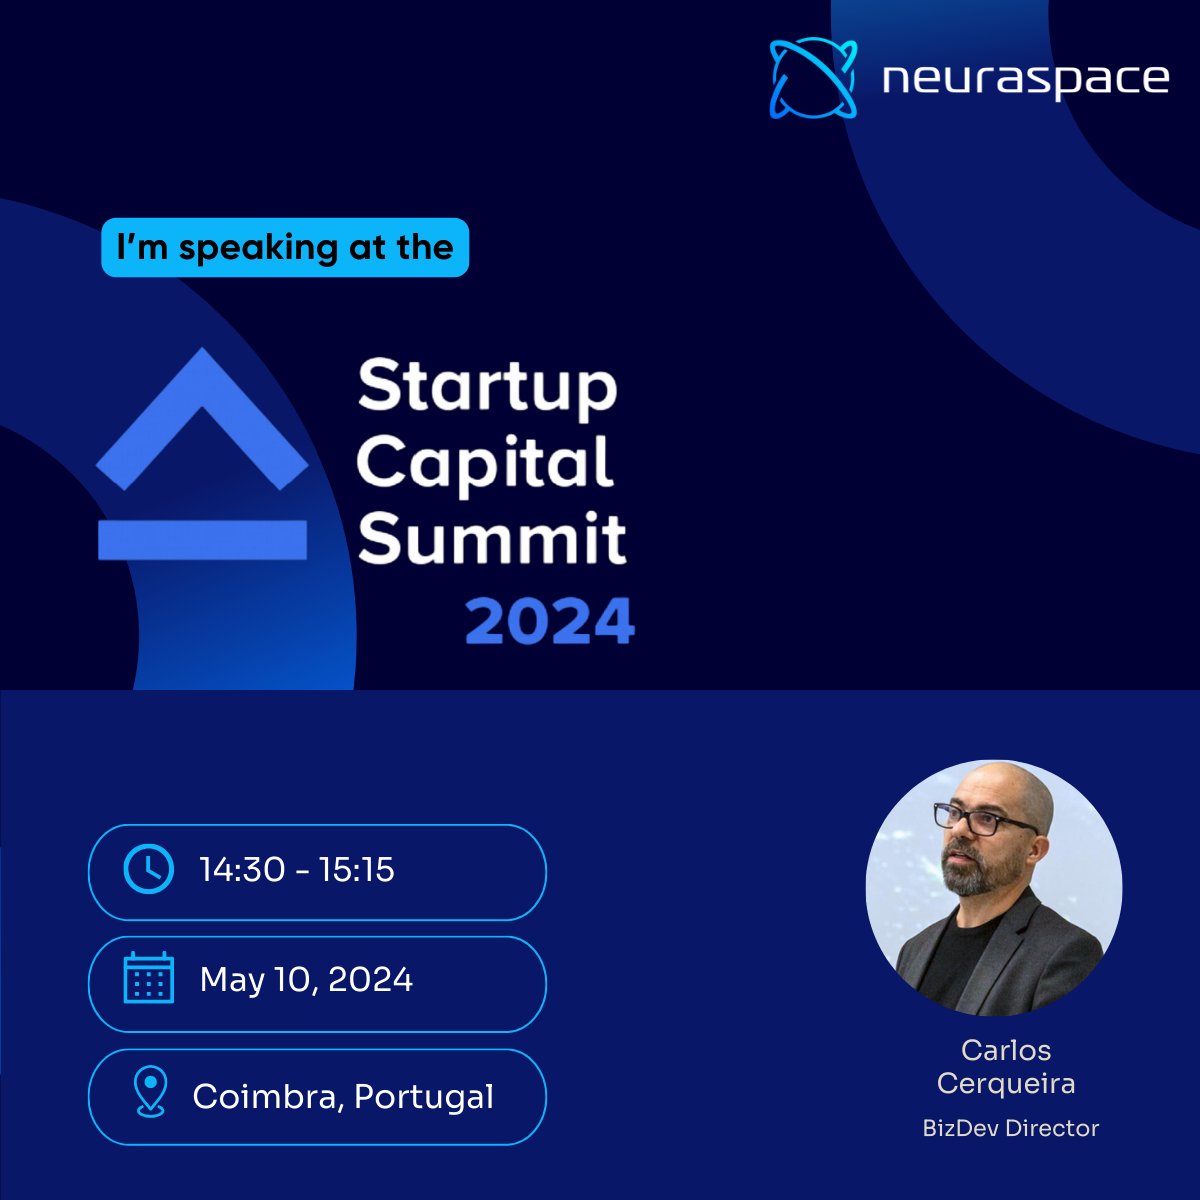 🚀 Don't miss Carlos Cerqueira, Business Development Director of Neuraspace, as he takes the stage today at the Startup Capital Summit! Join the 'Space: The Next Frontier' panel discussion from 14:30 - 15:15. #Space #SpaceEvents #SpaceTech #StartupCapitalSummit